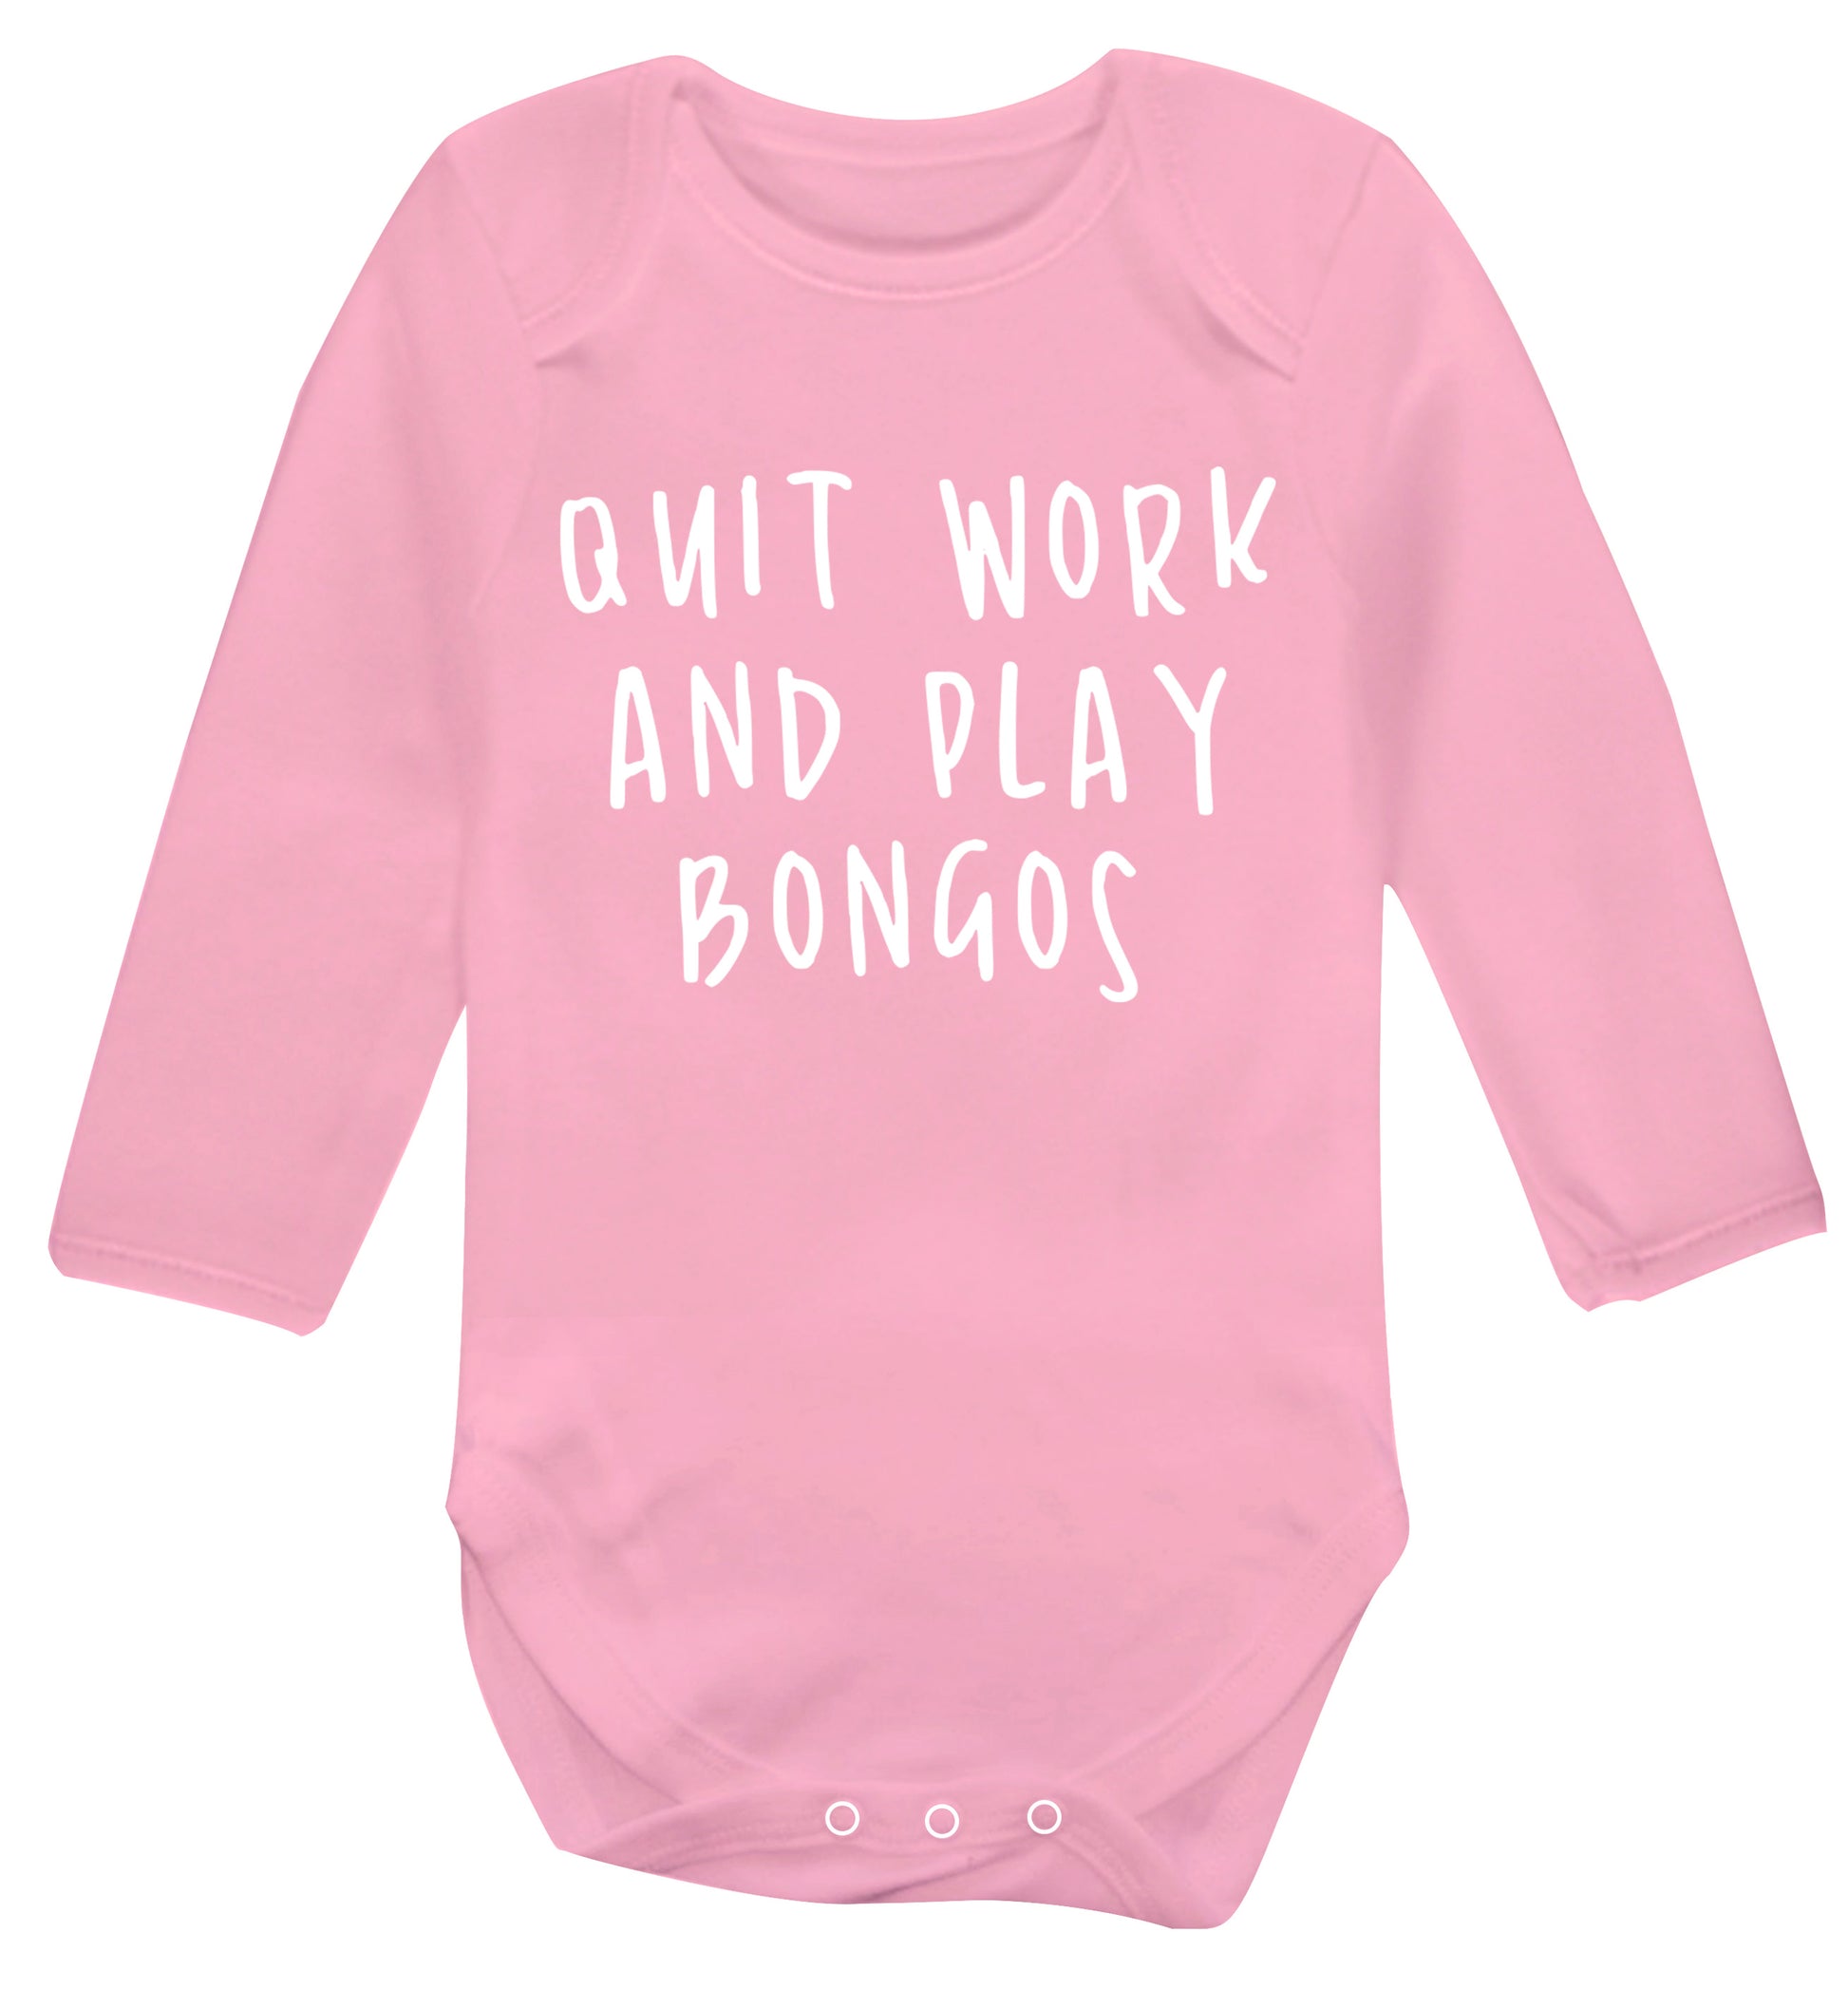 Quit work and play bongos Baby Vest long sleeved pale pink 6-12 months